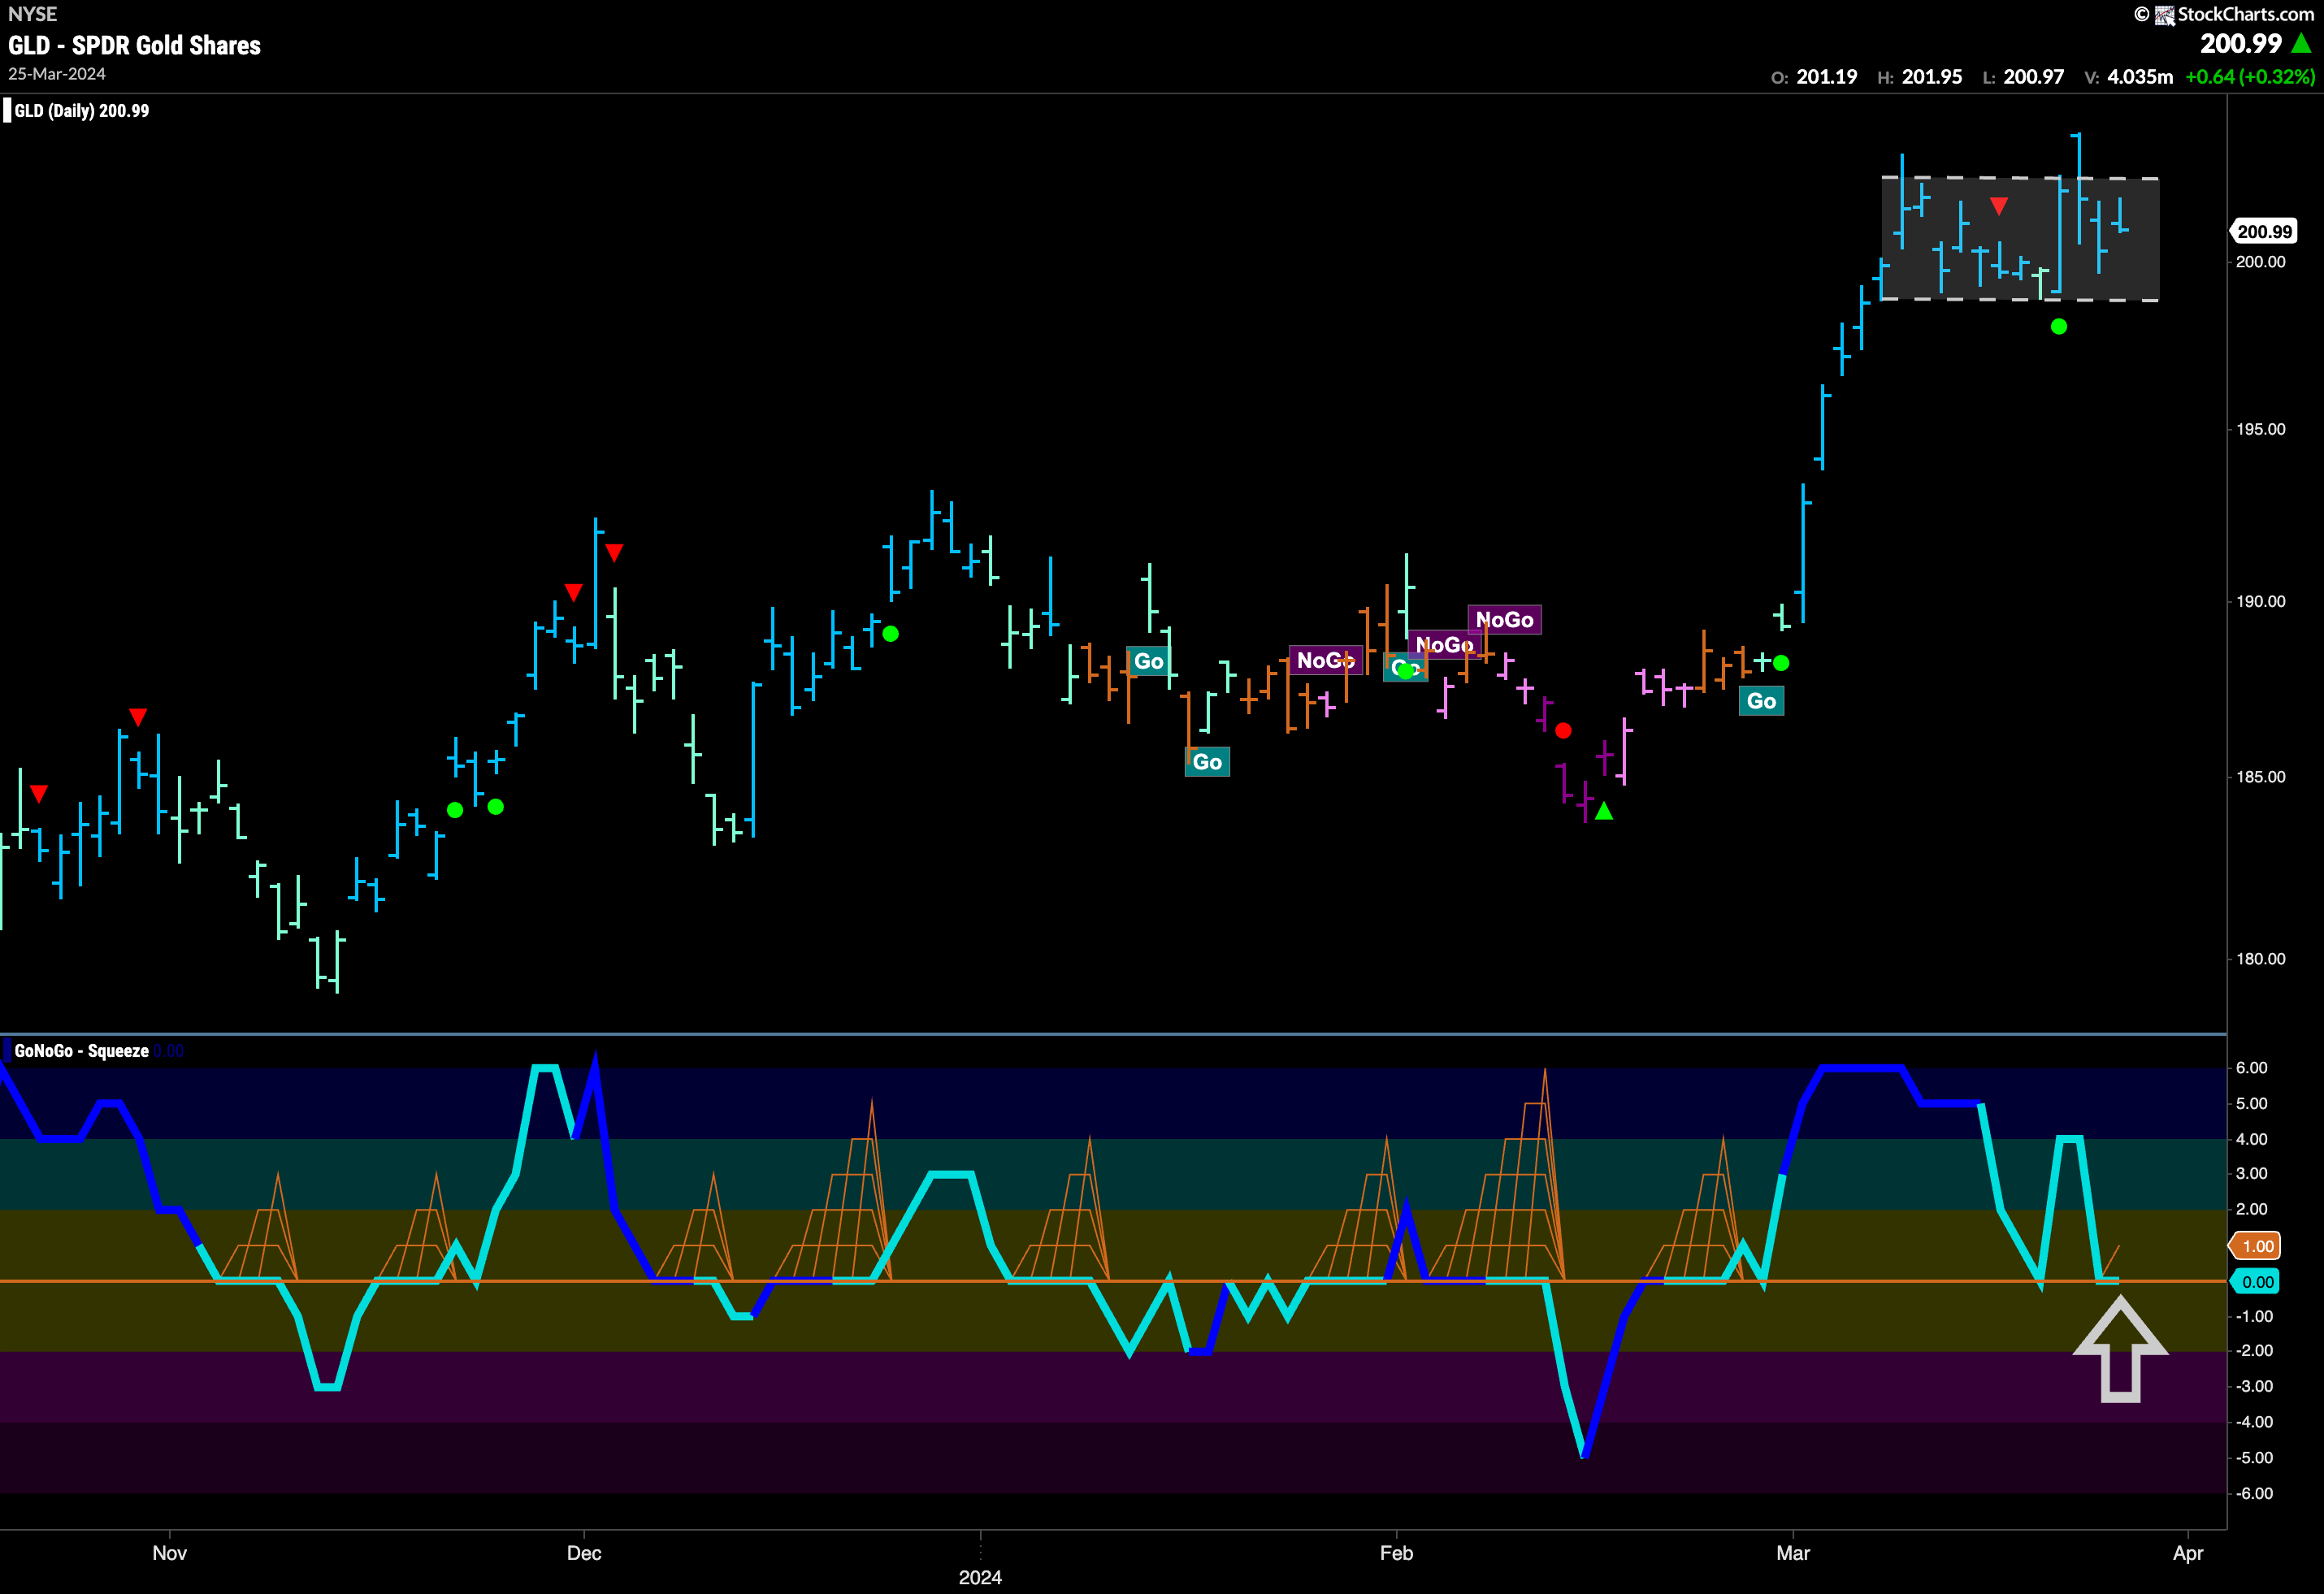 $GLD setting up for new highs